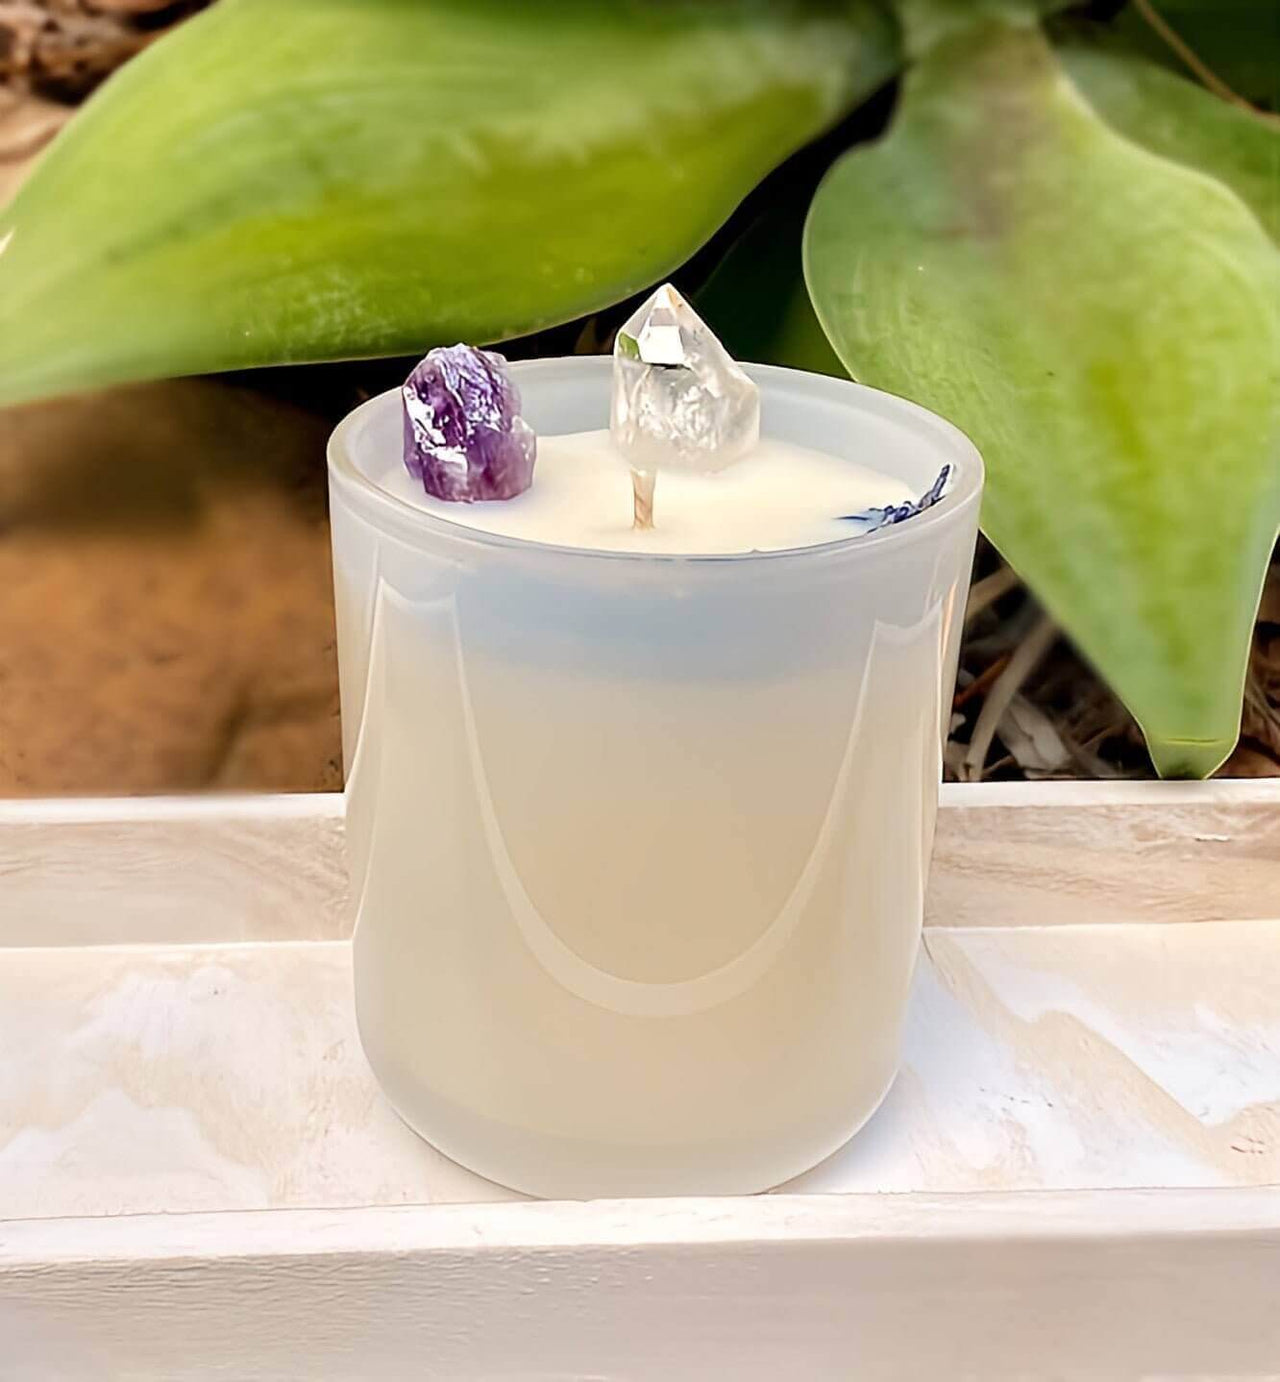 Amethyst Infused Candle - Serene Aroma Indulge in tranquility with our Amethyst Crystal Candle. Handcrafted with natural soy wax for a peaceful and healing aromatherapy experience.